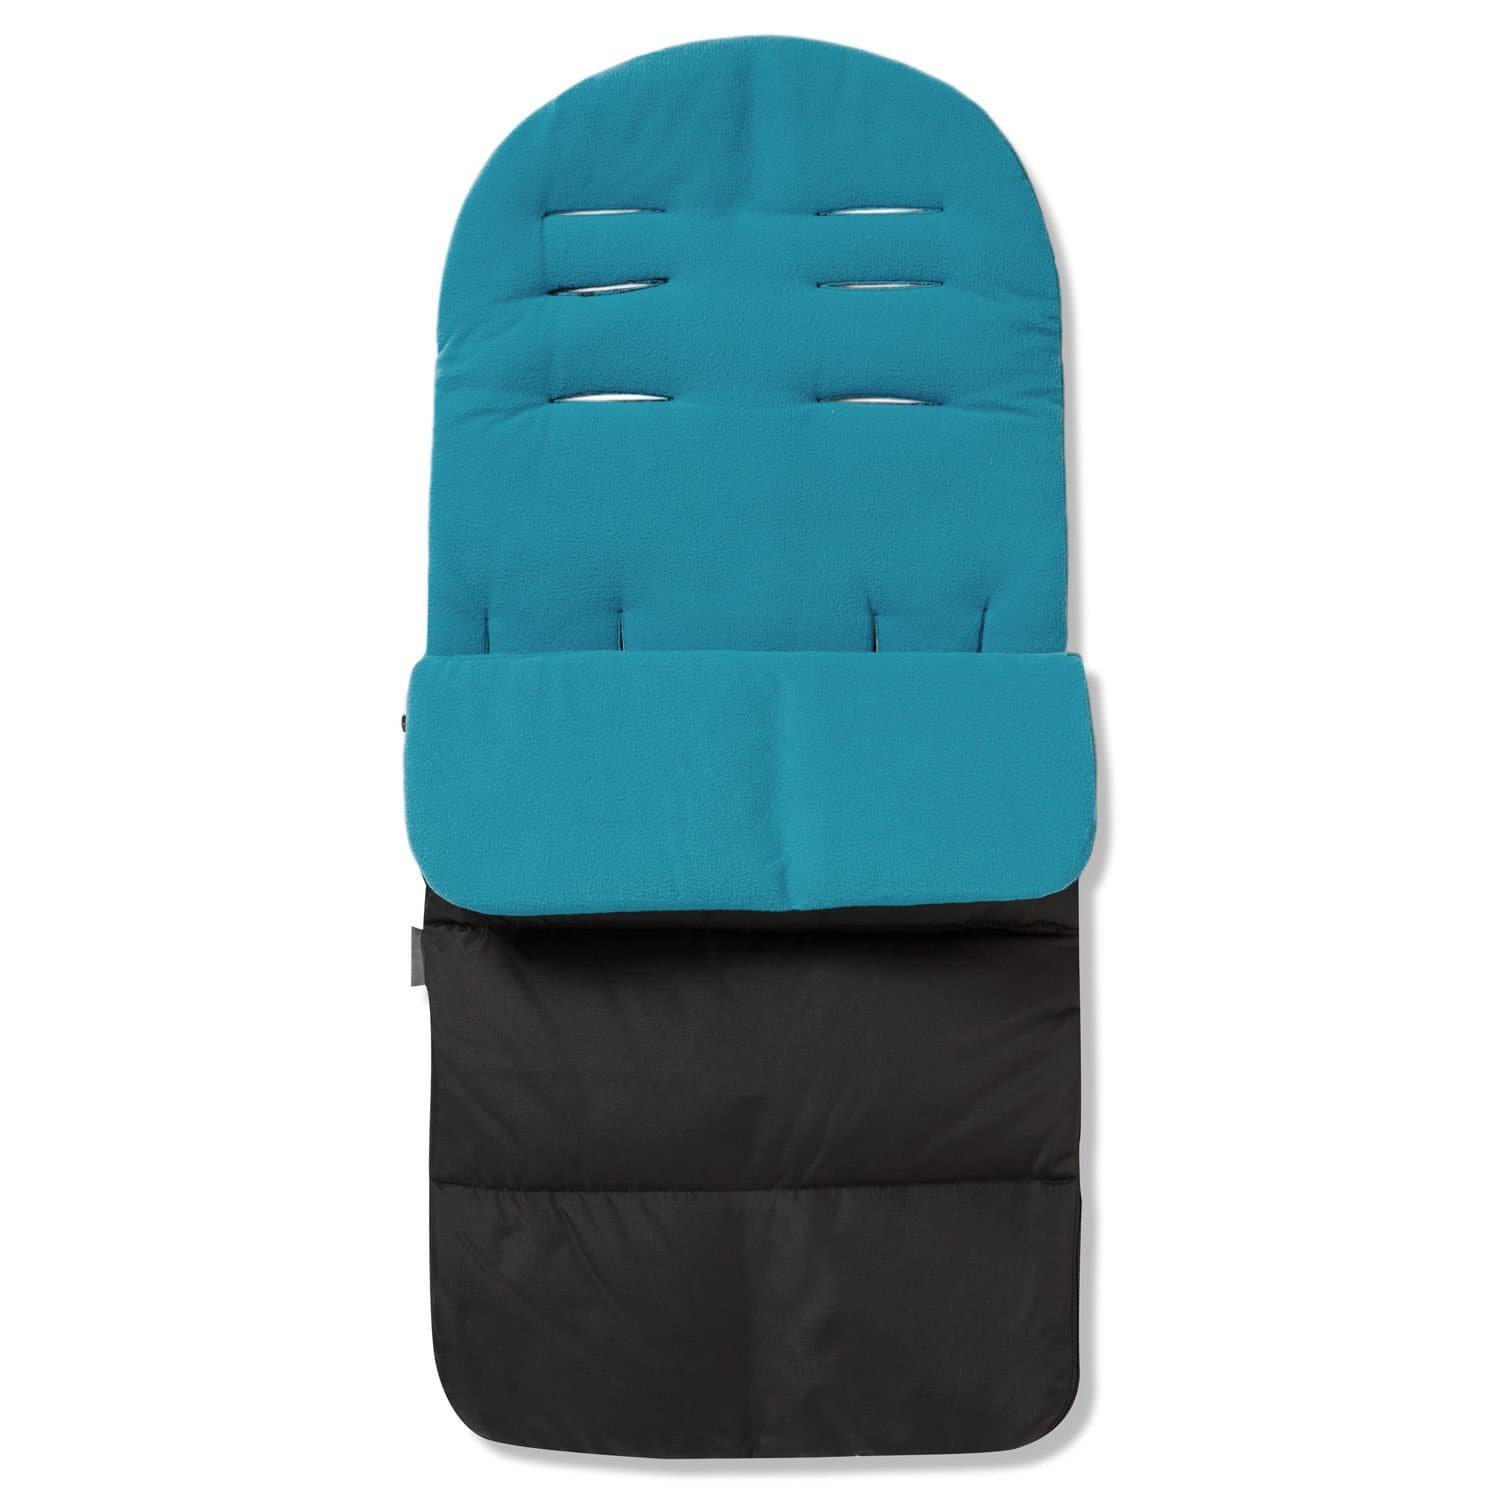 Premium Footmuff / Cosy Toes Compatible with BOB - Ocean Blue / Fits All Models | For Your Little One